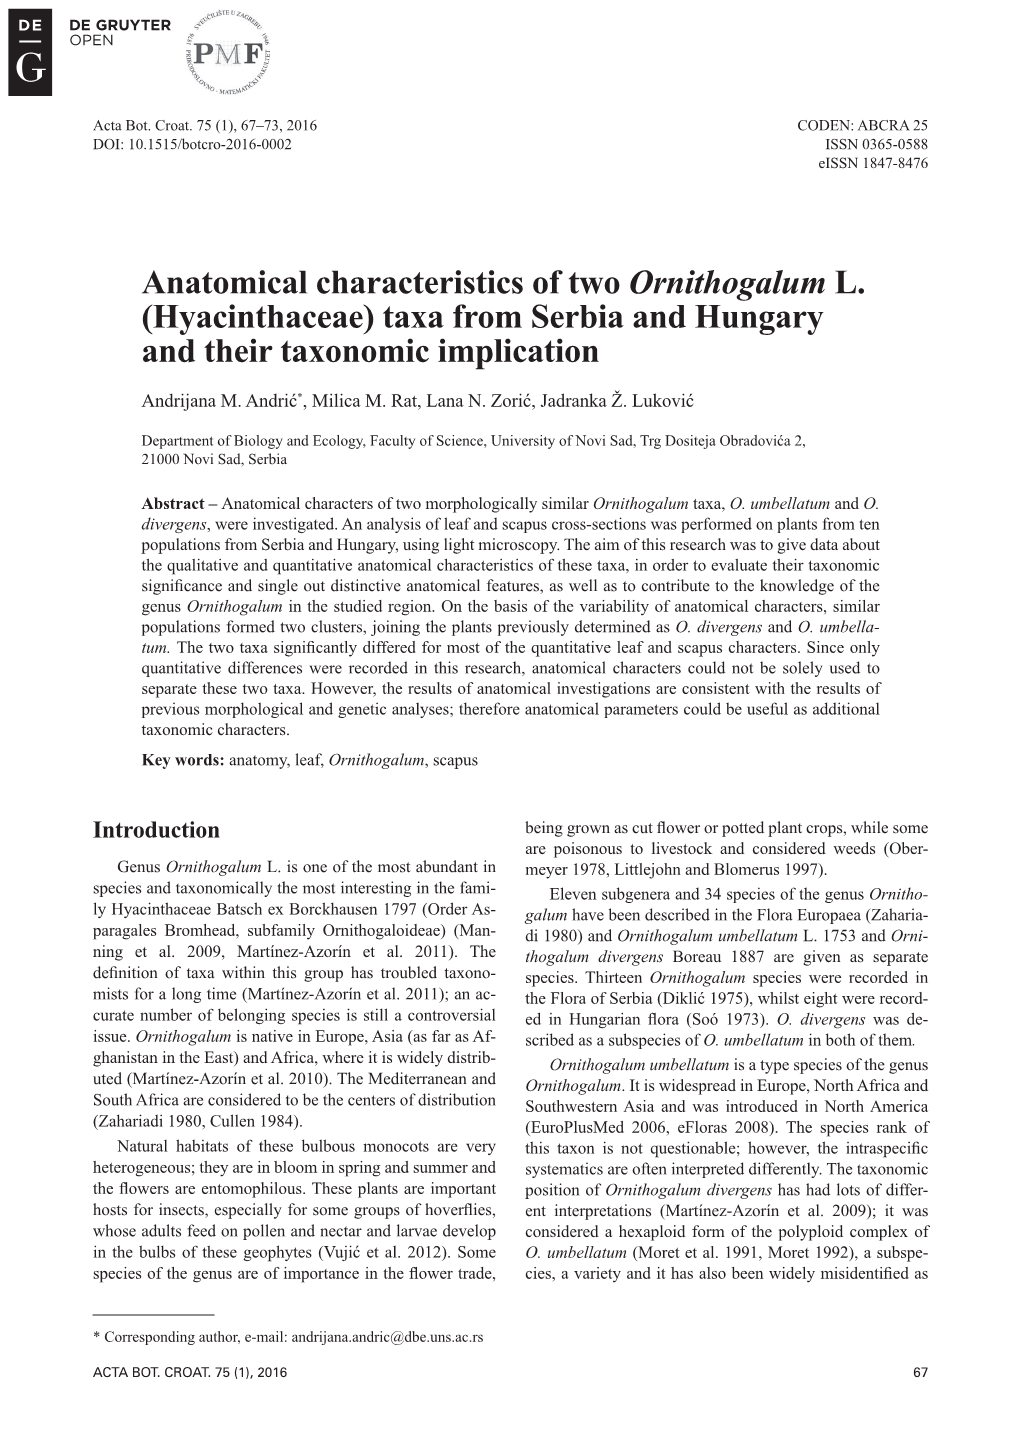 Anatomical Characteristics of Two Ornithogalum L. (Hyacinthaceae) Taxa from Serbia and Hungary and Their Taxonomic Implication